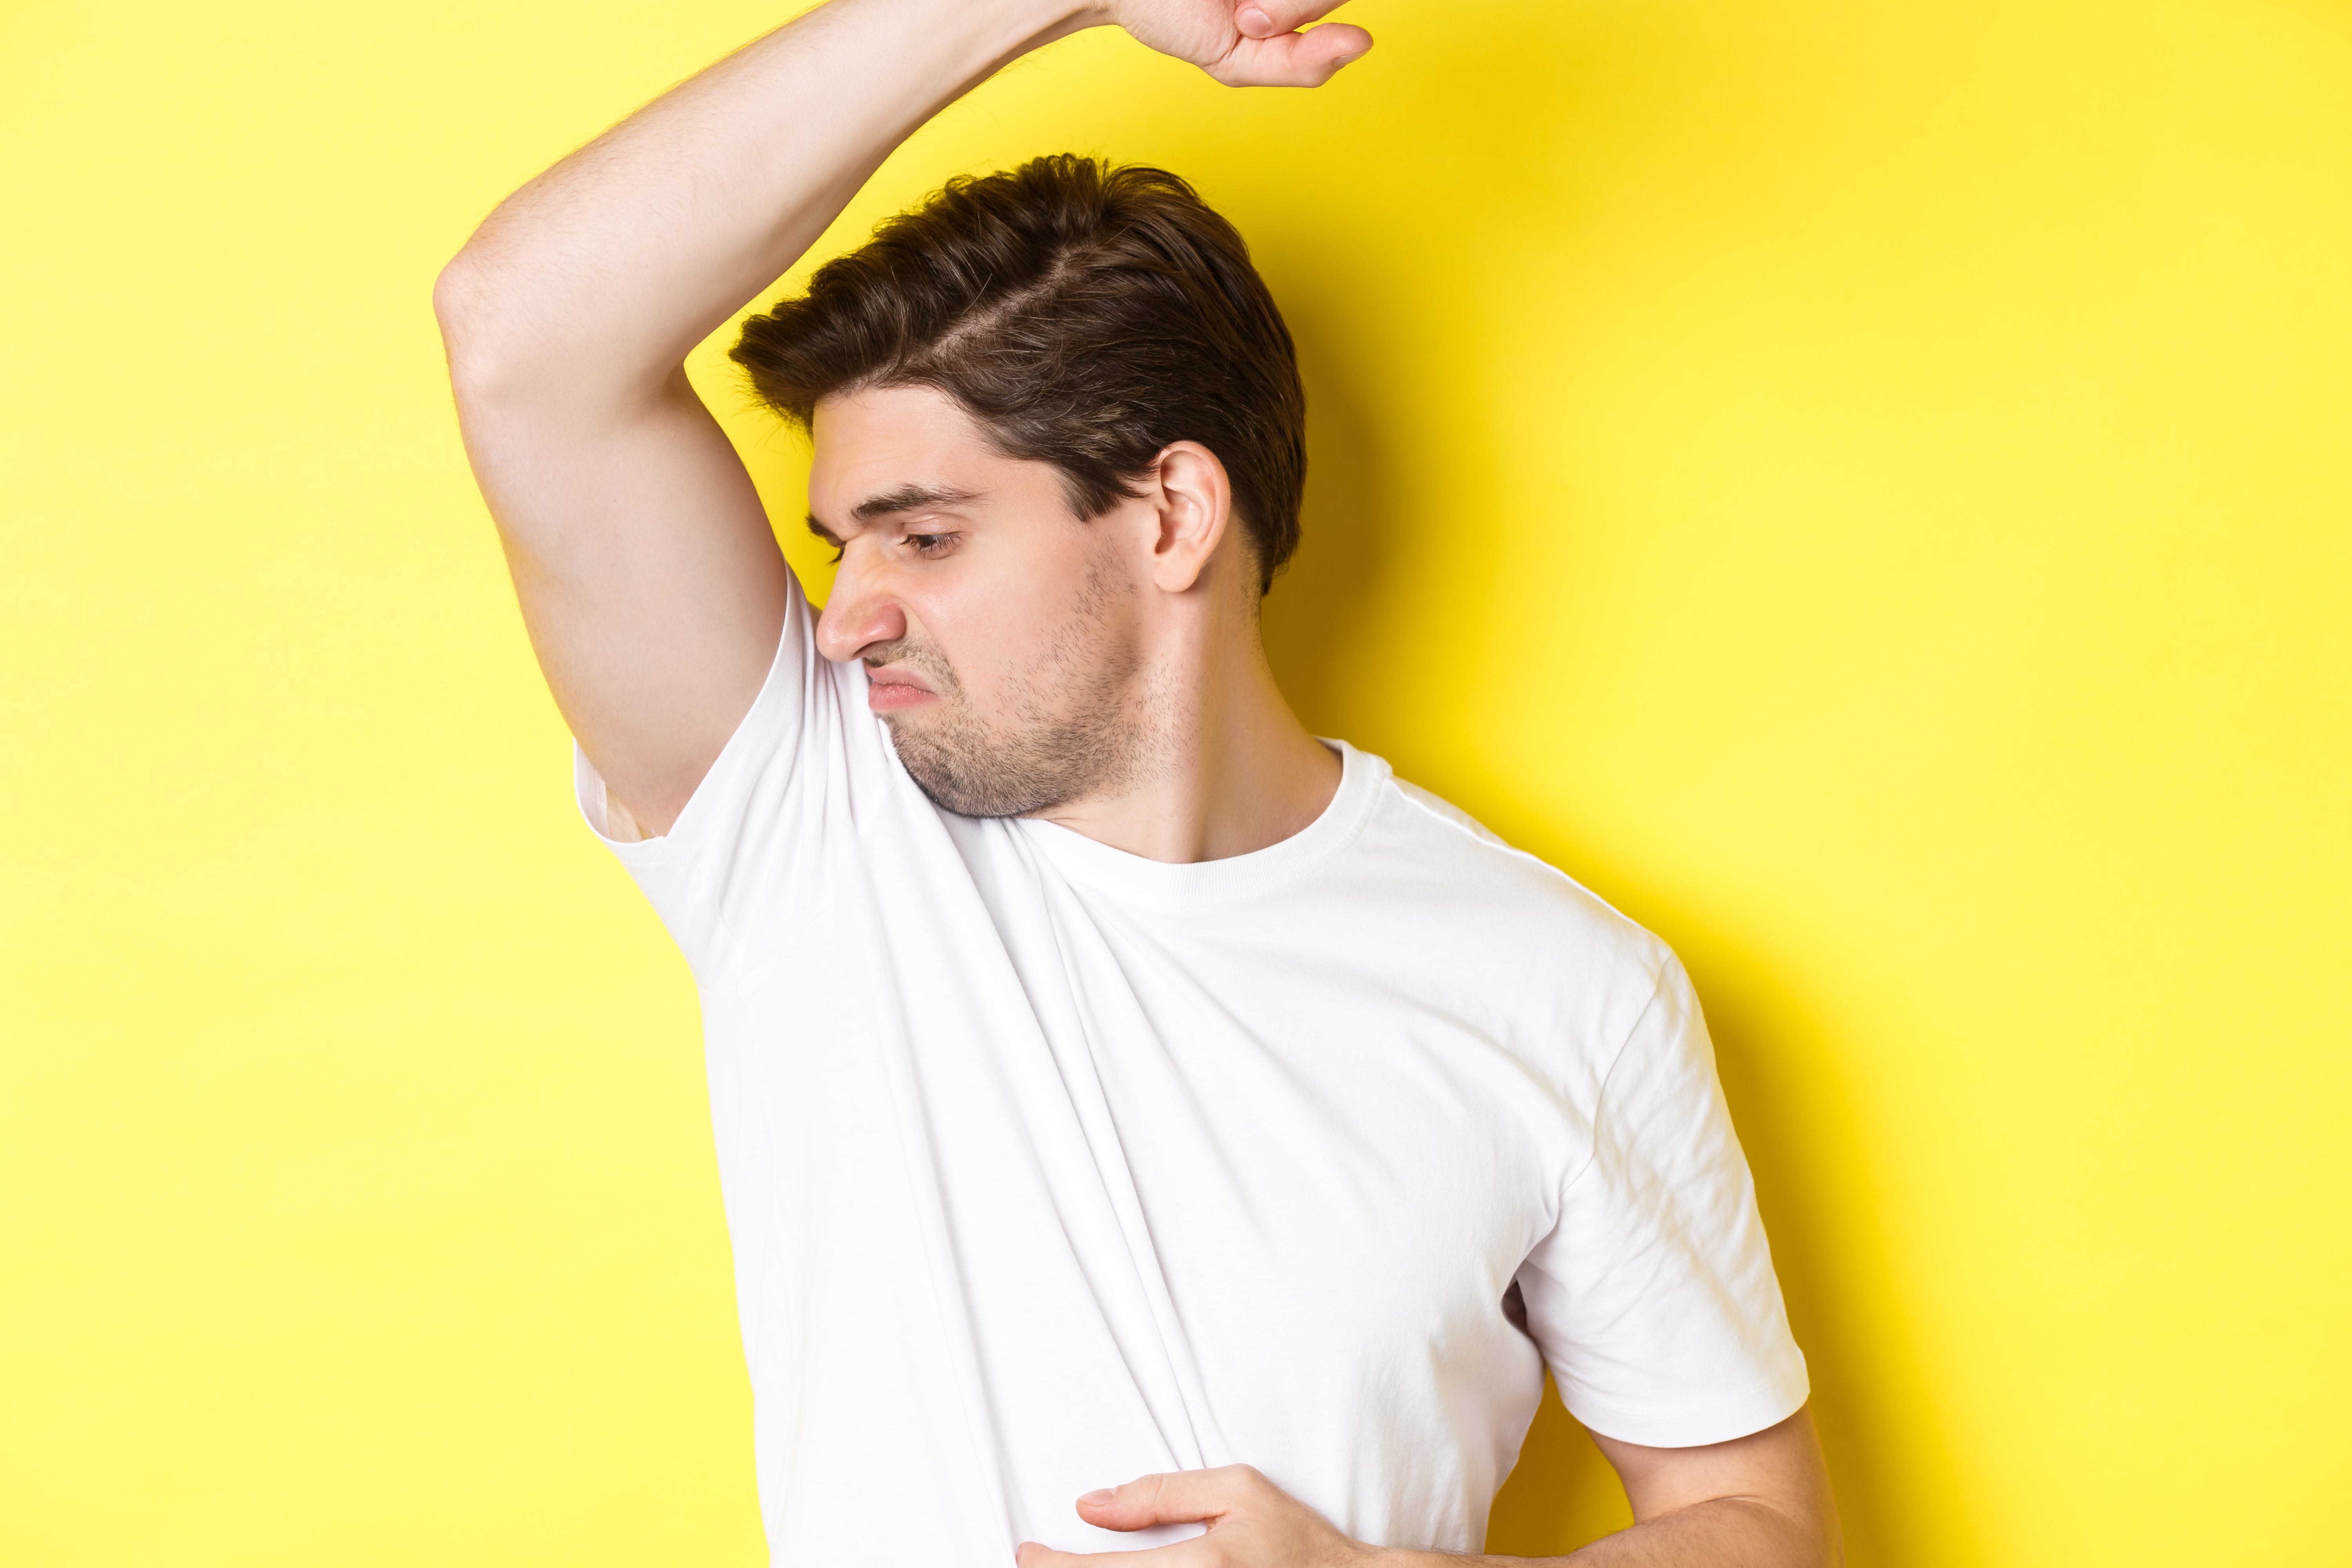 man-sweat-smelling-his-armpit-standing-white-t-shirt-grimacing-from-stinky-clothes.jpg__PID:3f0013eb-4566-41b7-b4cc-b3423adafde3